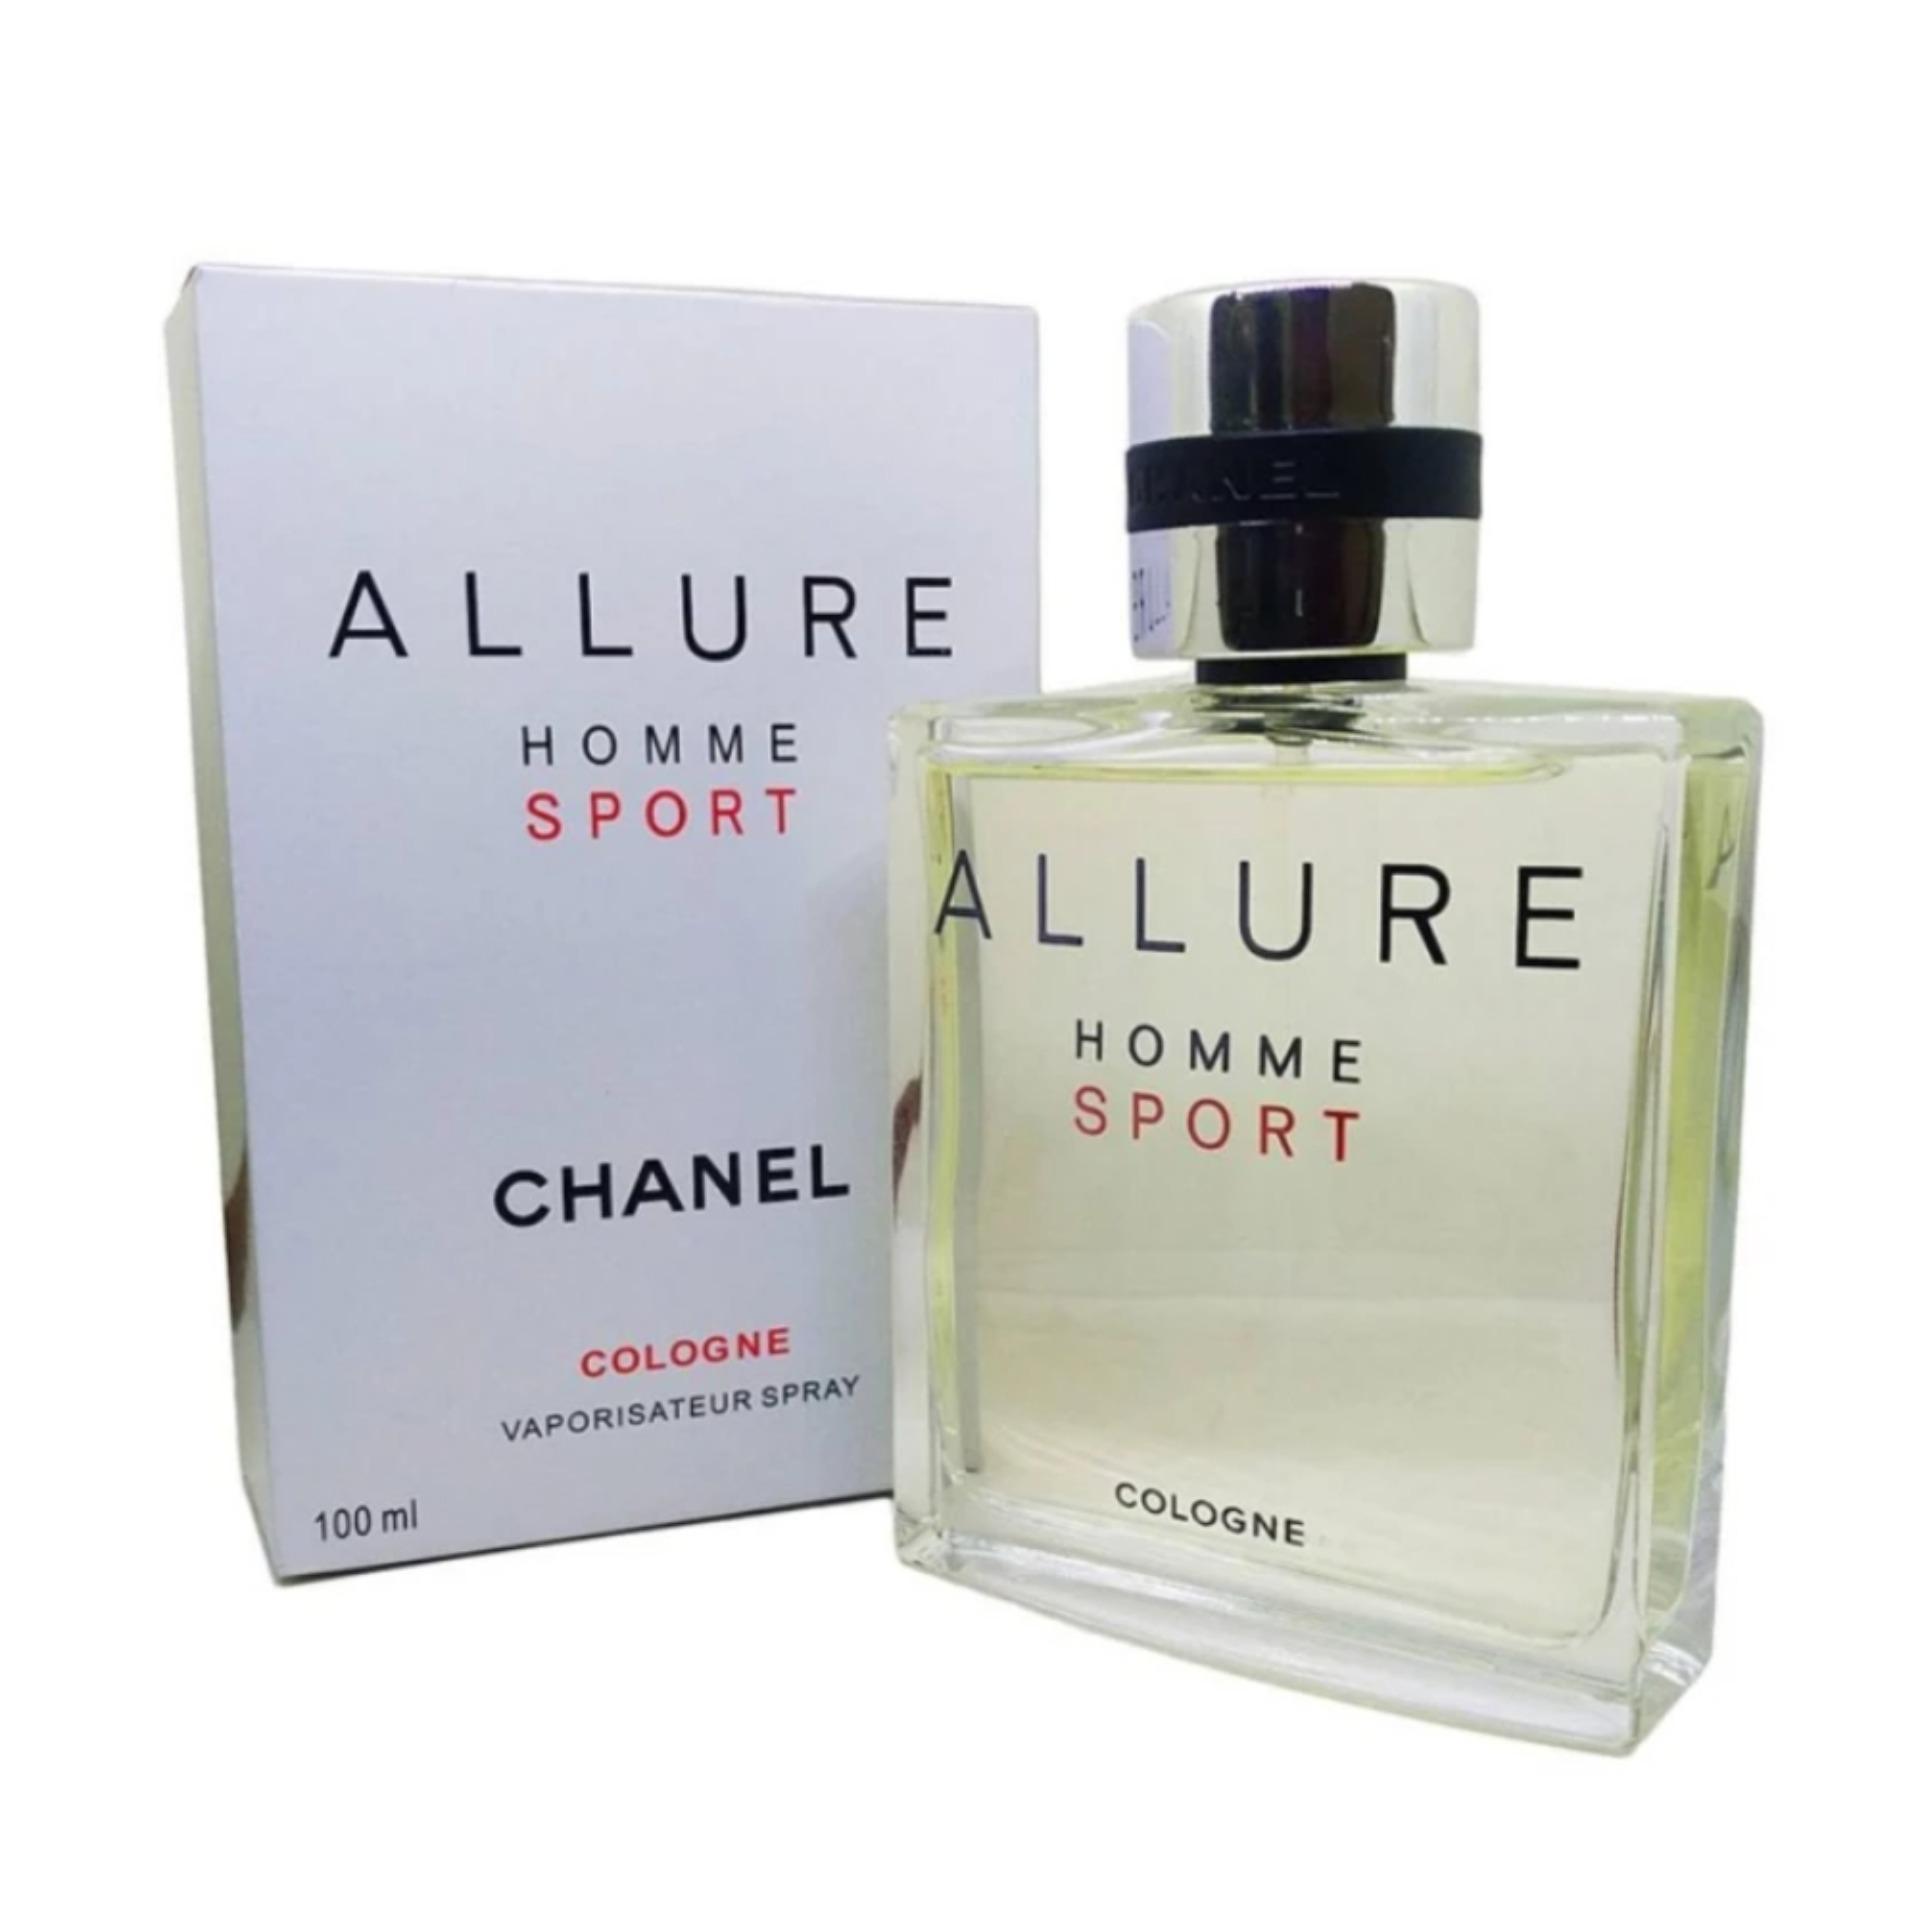 Chanel allure homme cologne. Chanel Allure homme Sport 100ml. Chanel Allure homme Sport Cologne 100 ml. Аллюр хом Шанель 100 мл. Chanel Allure homme Sport.